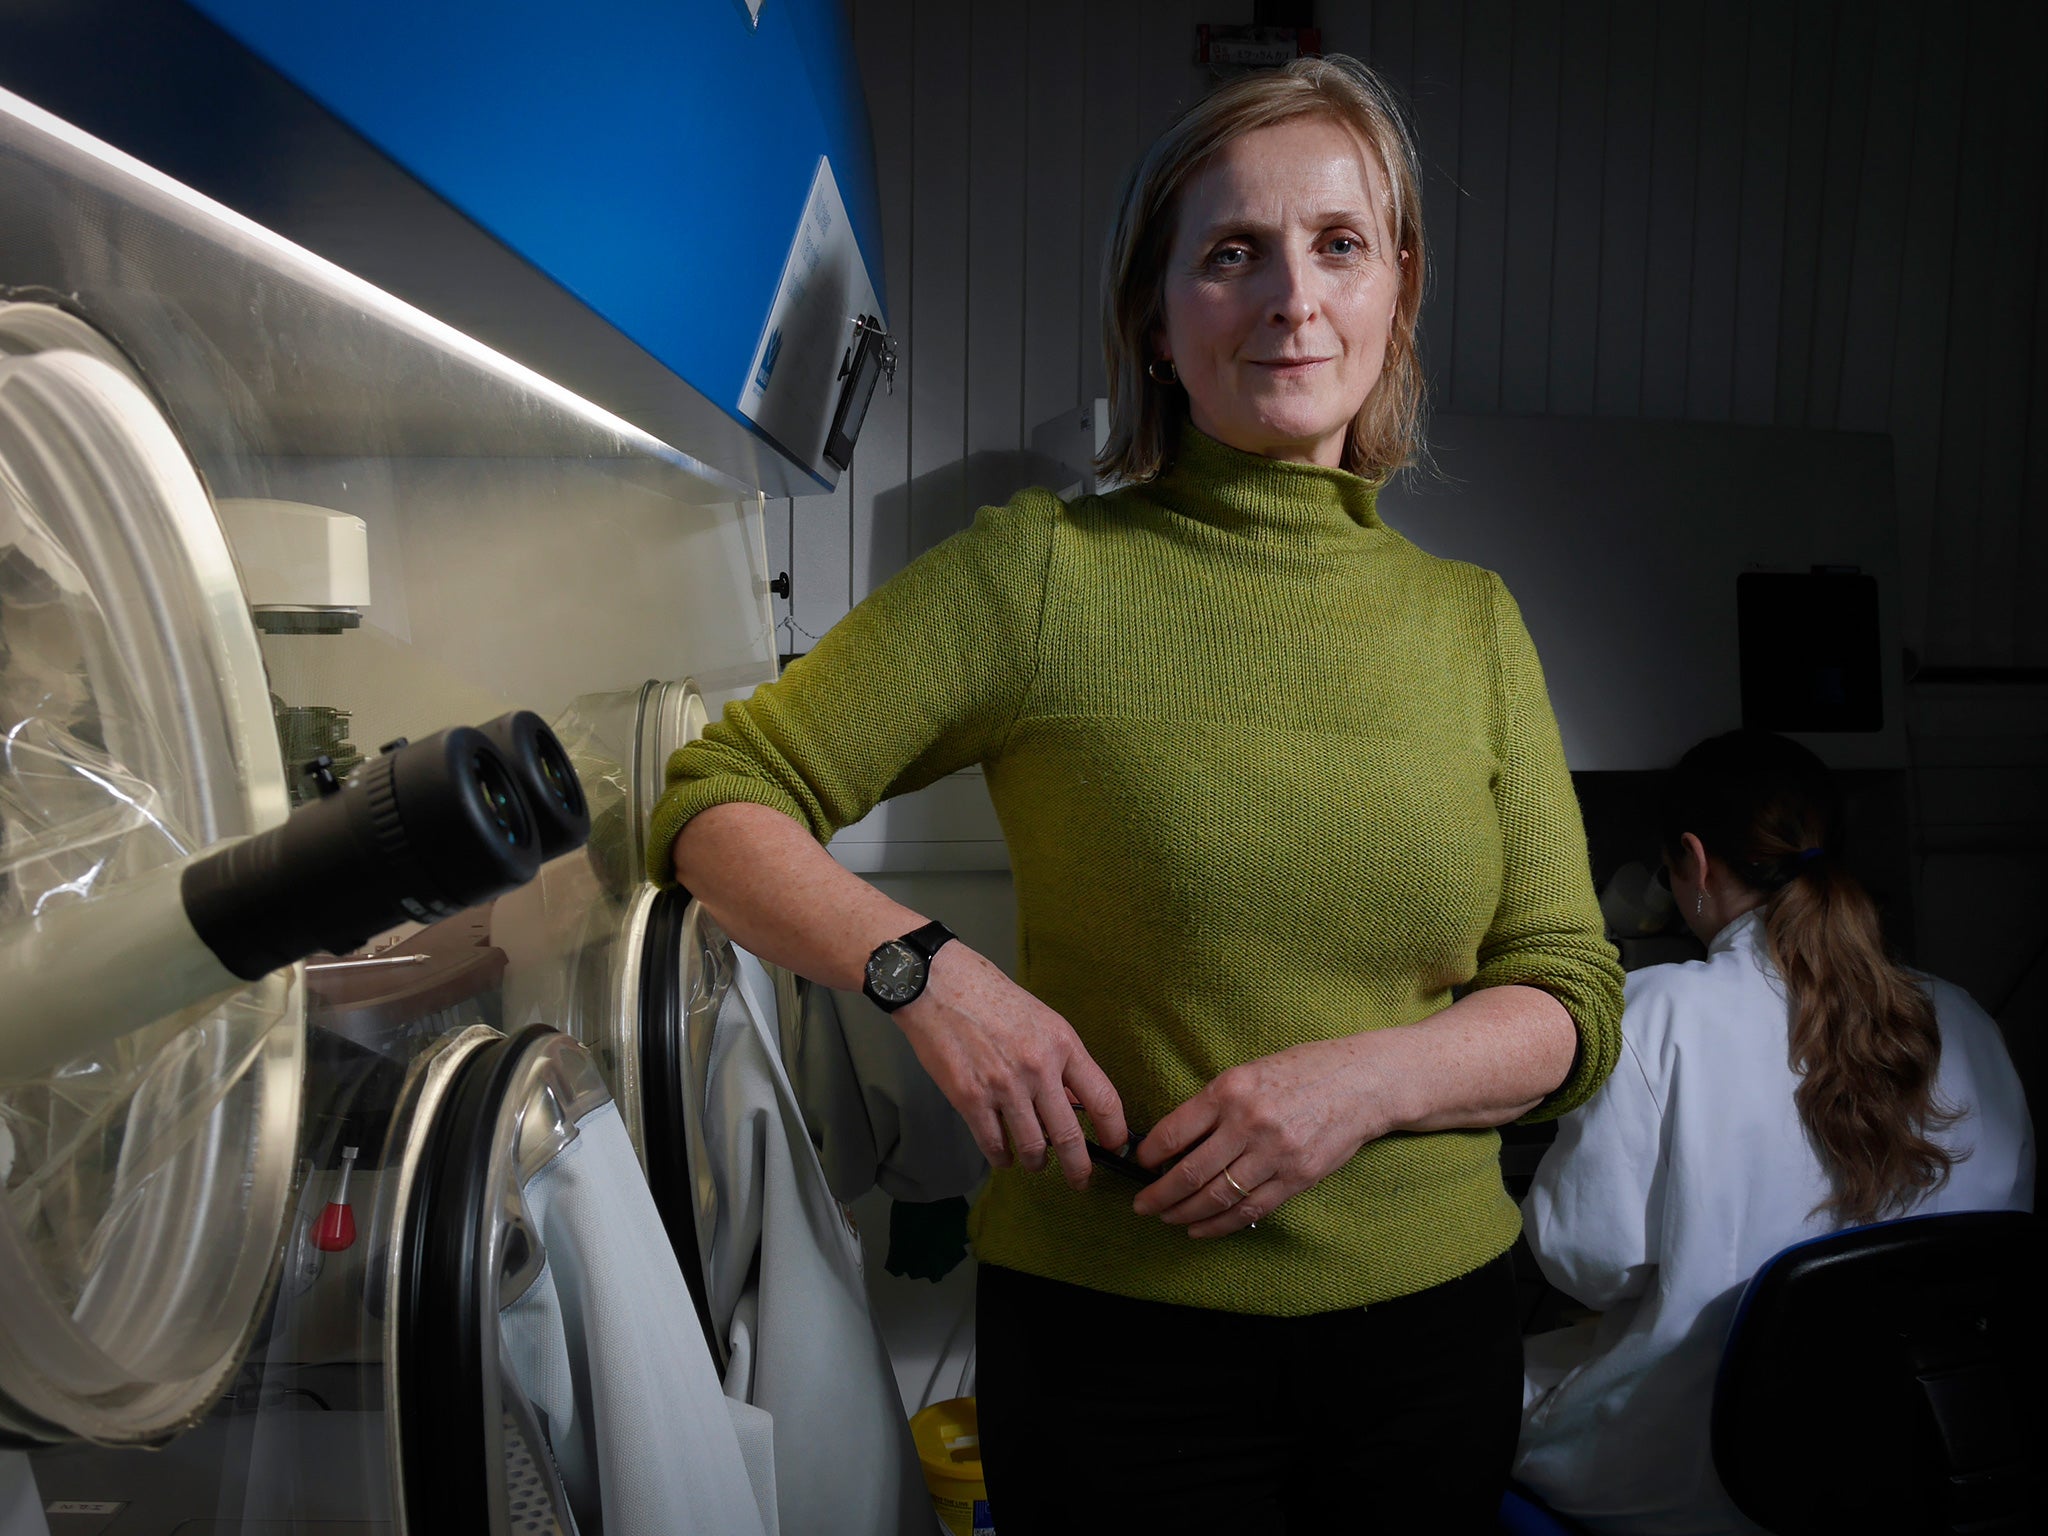 Professor Mary Herbert is at the forefront of the mitochondria transfer research in Newcastle